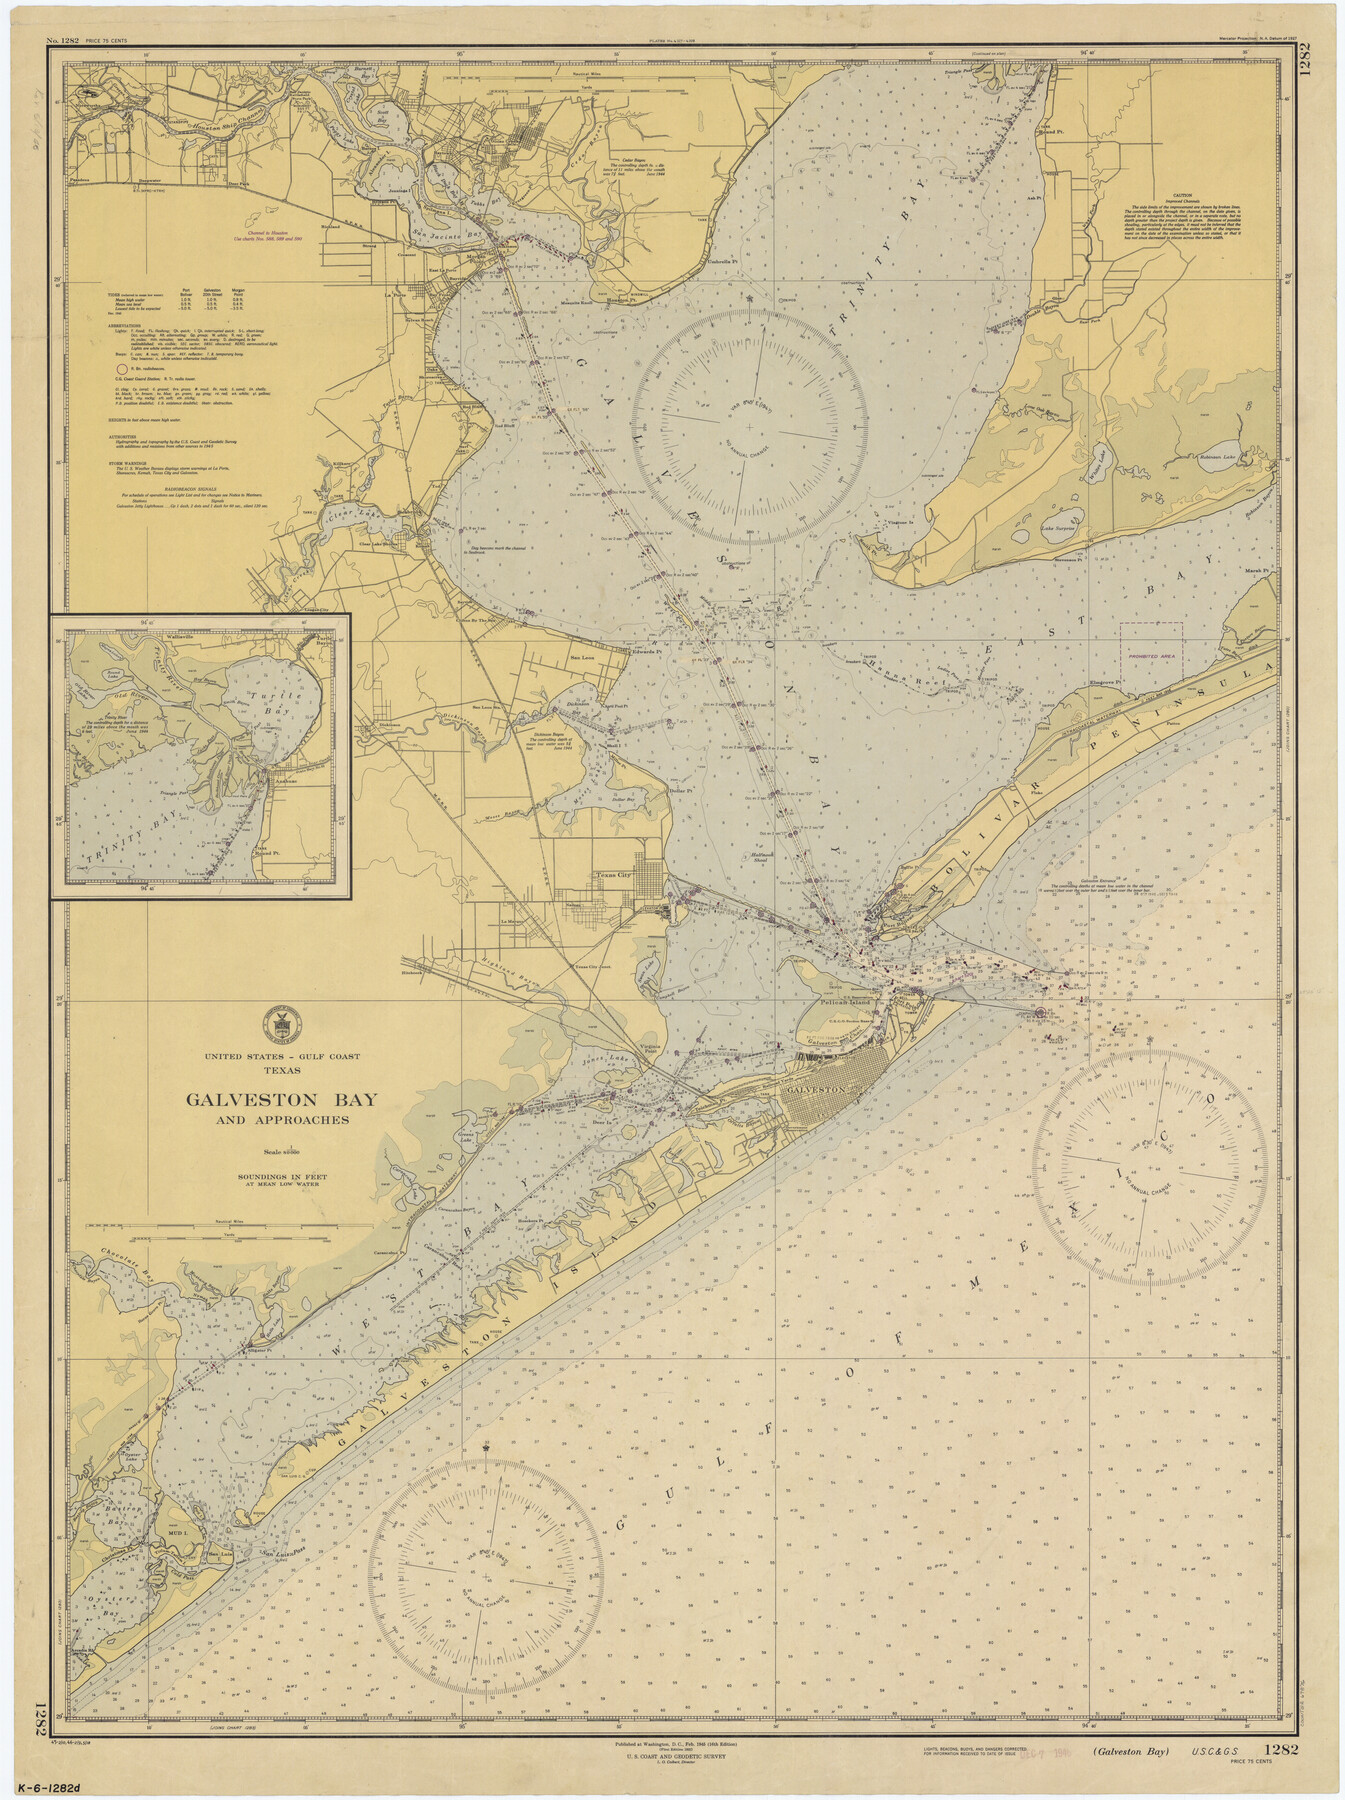 69876, Galveston Bay and Approaches, General Map Collection